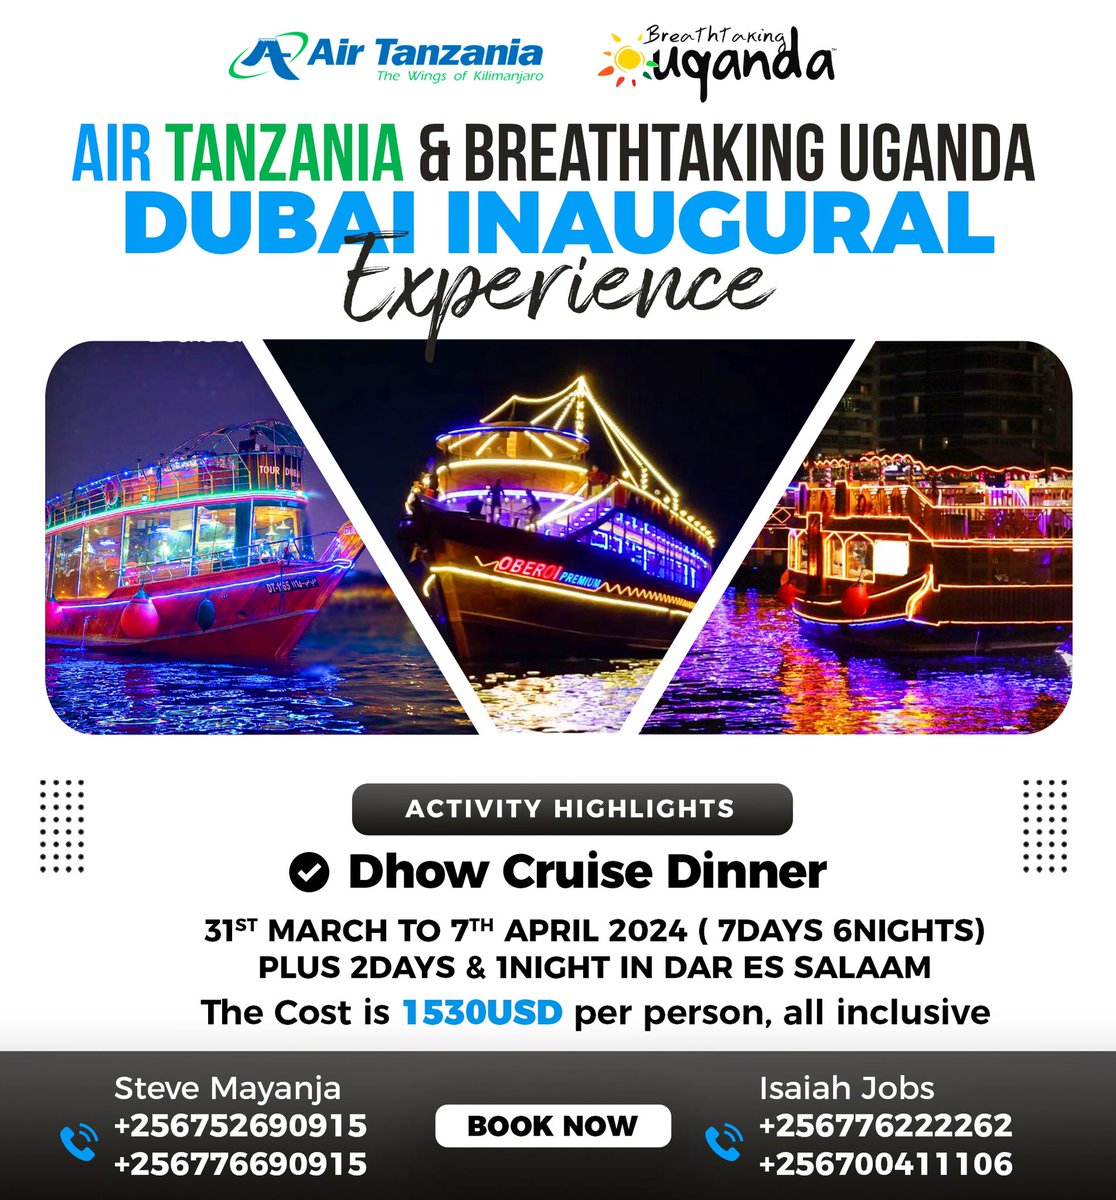 Don’t miss out on an evening of luxury and romance aboard a Dubai dhow cruise dinner,all part of #AirtanzaniaBreathtakingUgandaDubaiInauguralExperienc 's epic Book your spot now and be part of this unforgettable experience #VisitDubai #fleetlinetoursuganda #breathtakinguganda